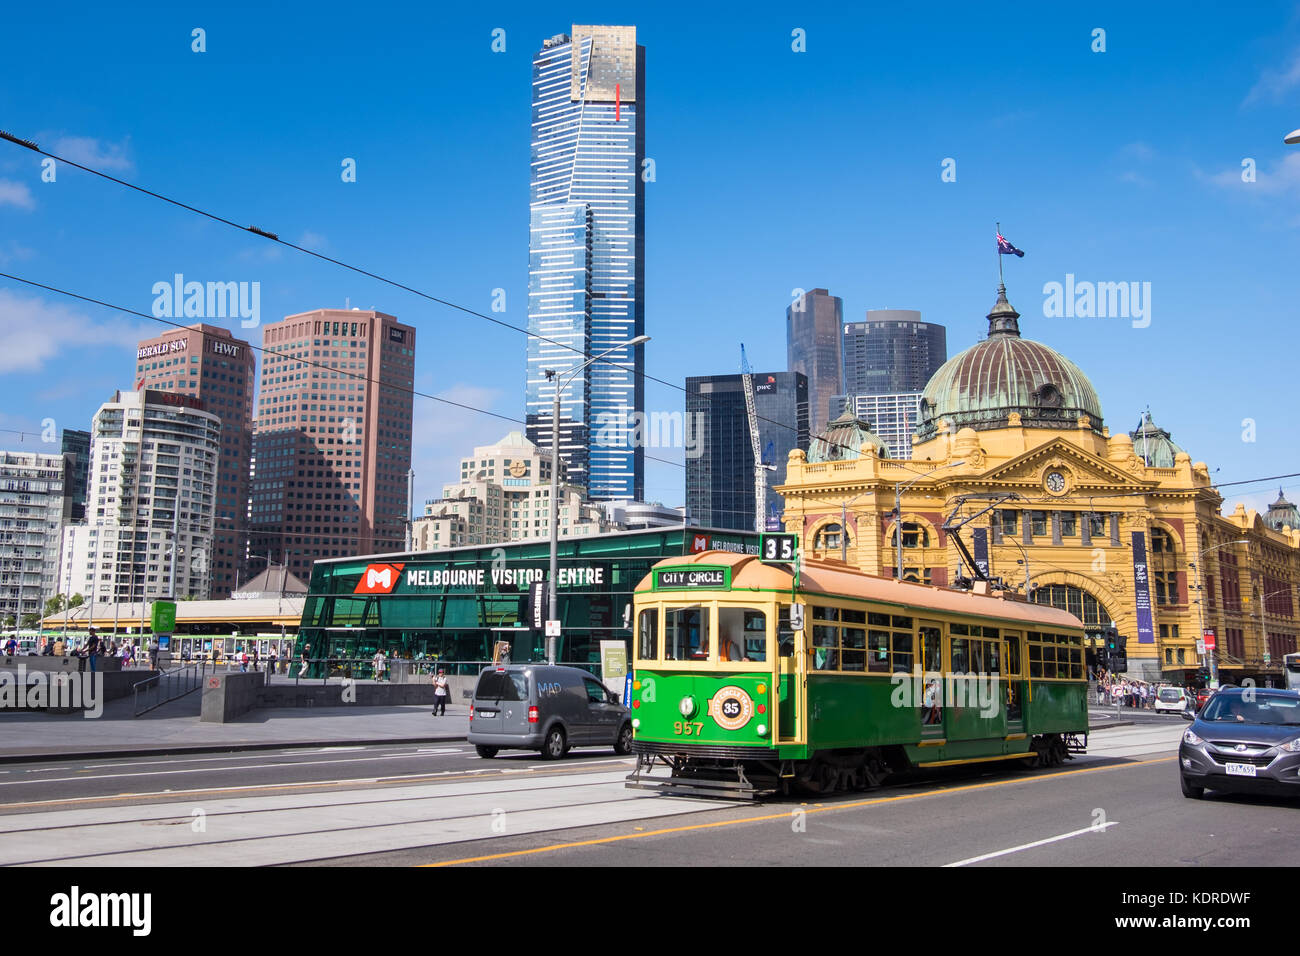 A general view of a tram passing Flinders Street Station in the Australian city of Melbourne Stock Photo